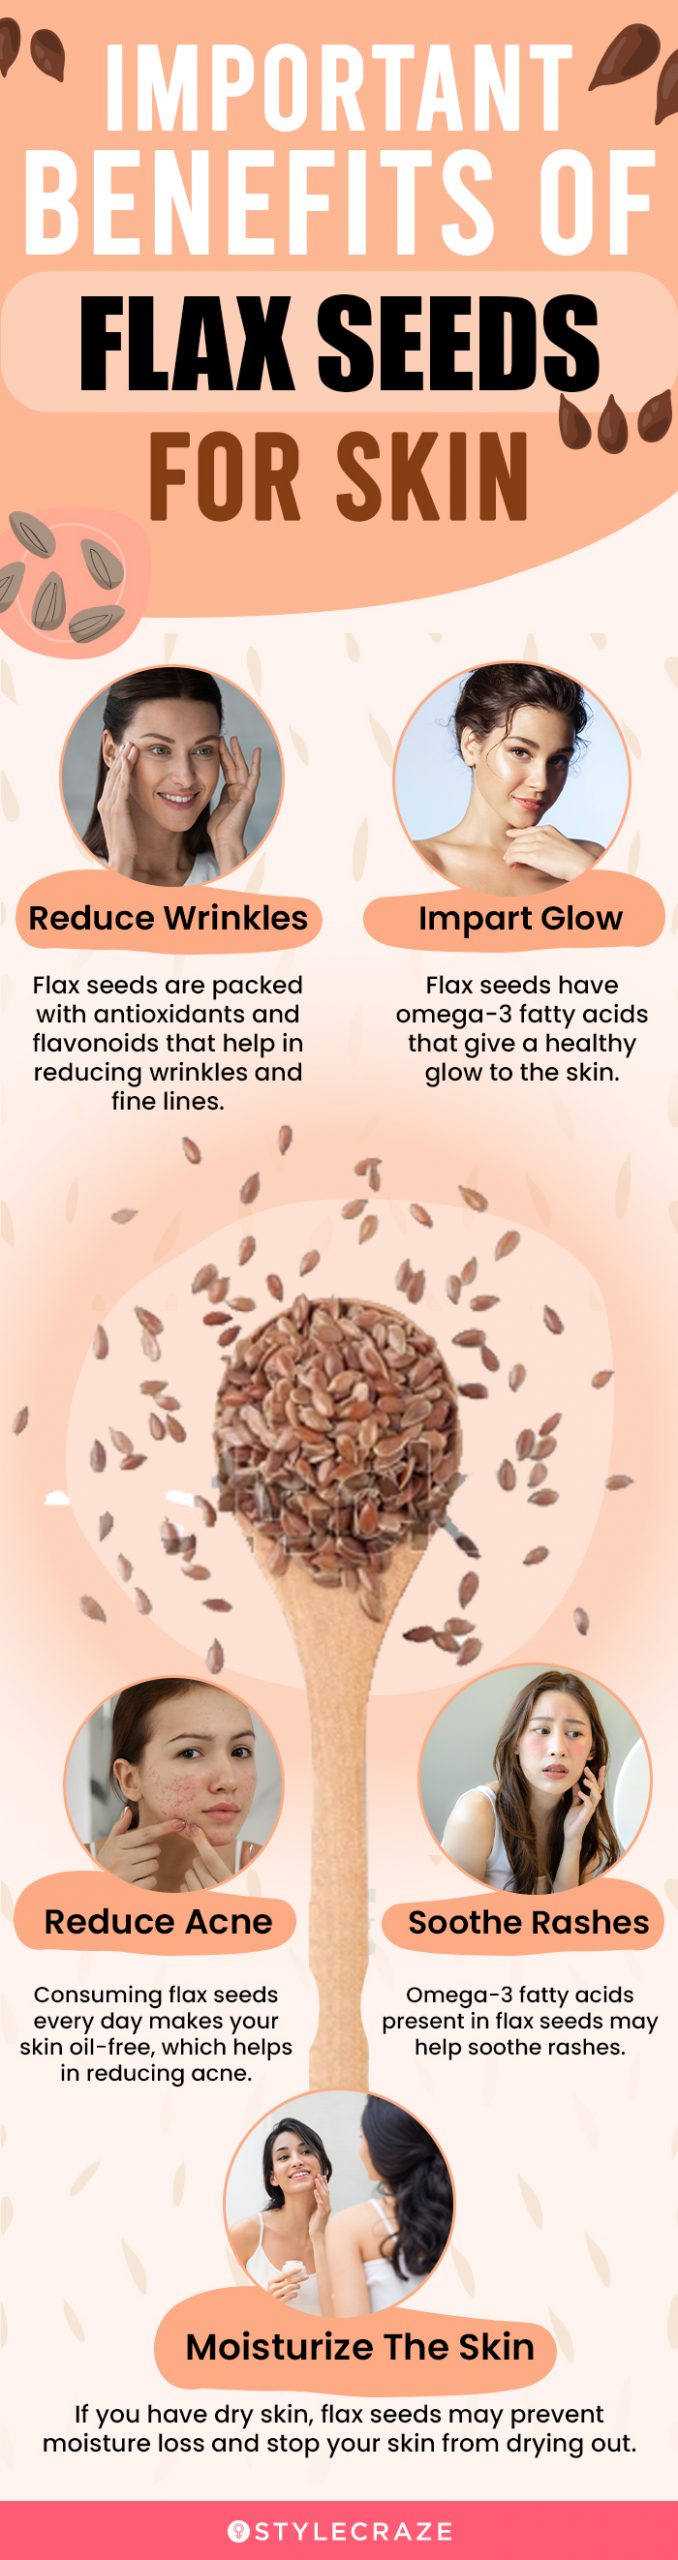 important benefits of flax seeds for skin (infographic)